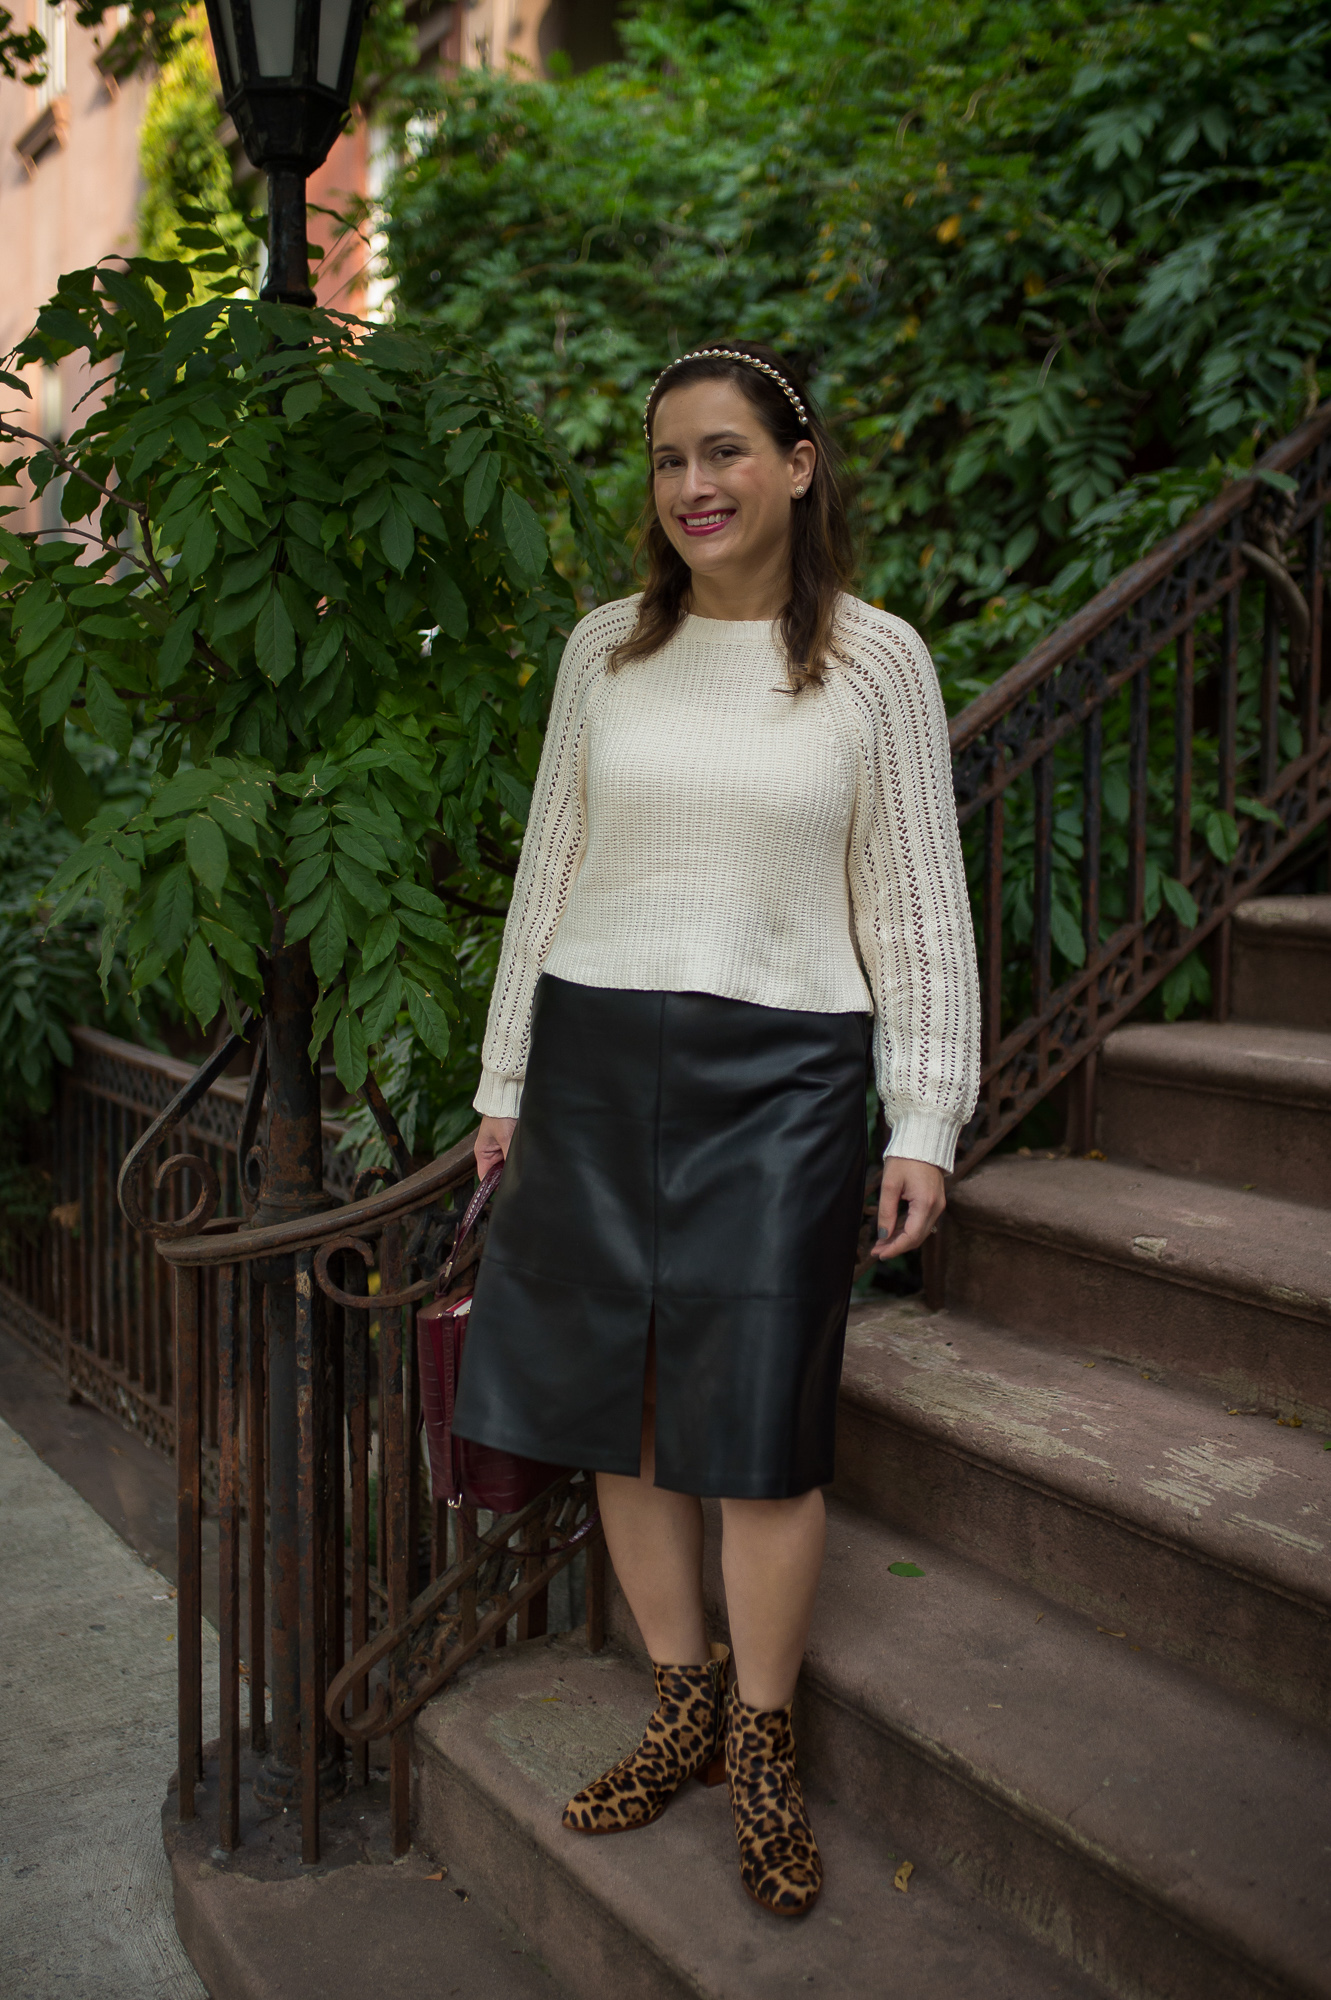 How to style a leather midi skirt